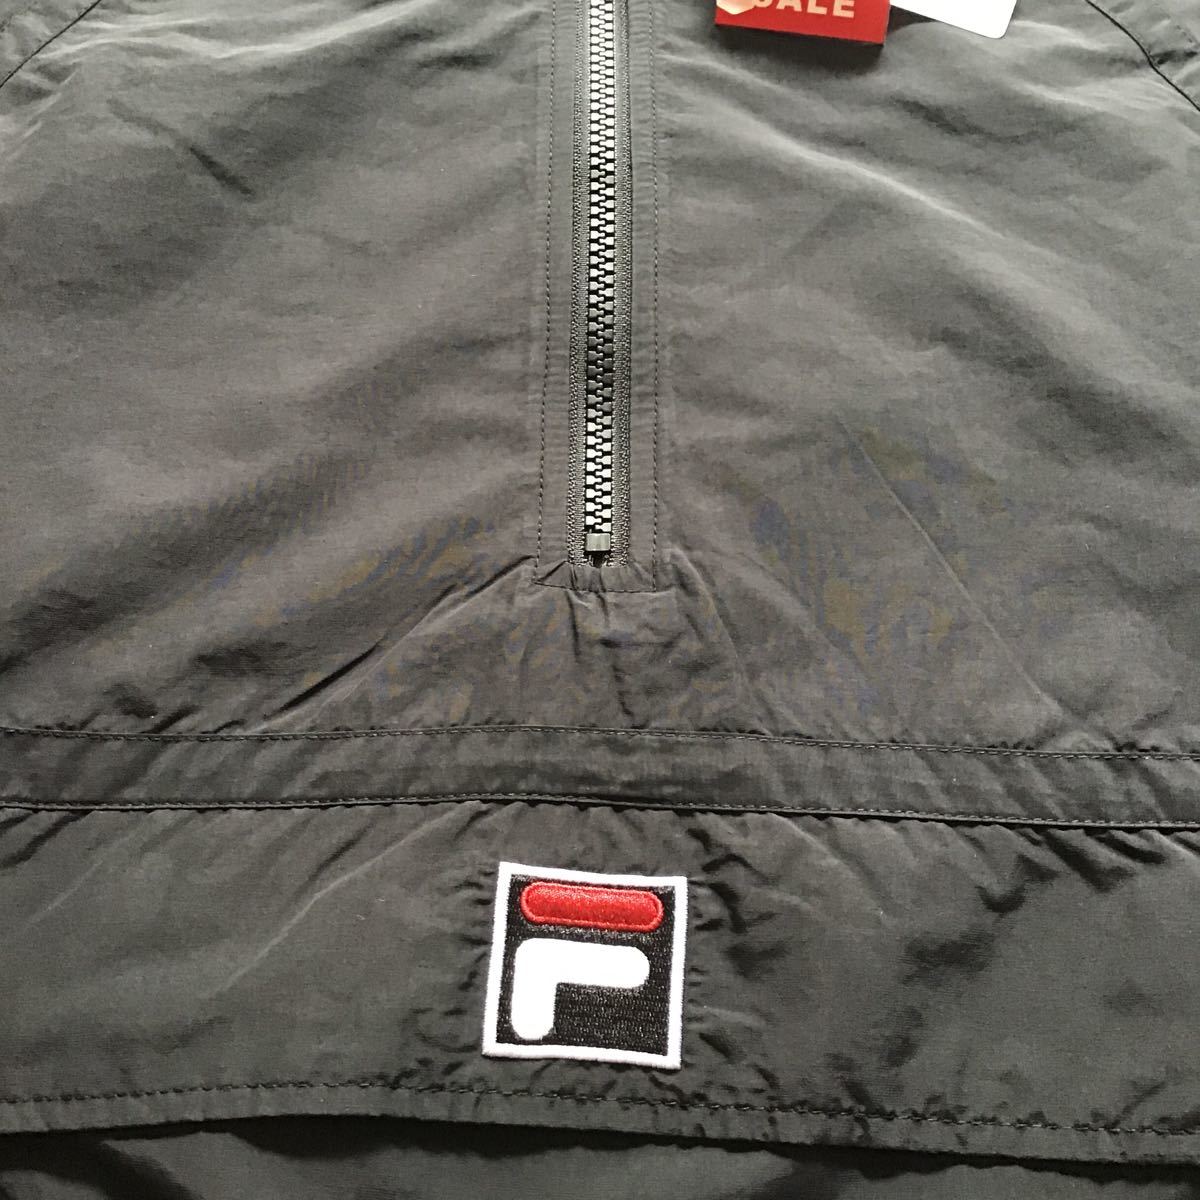  new goods FILAf-tiano rack Parker water-repellent cloth M size Black regular price 15,600 jpy 